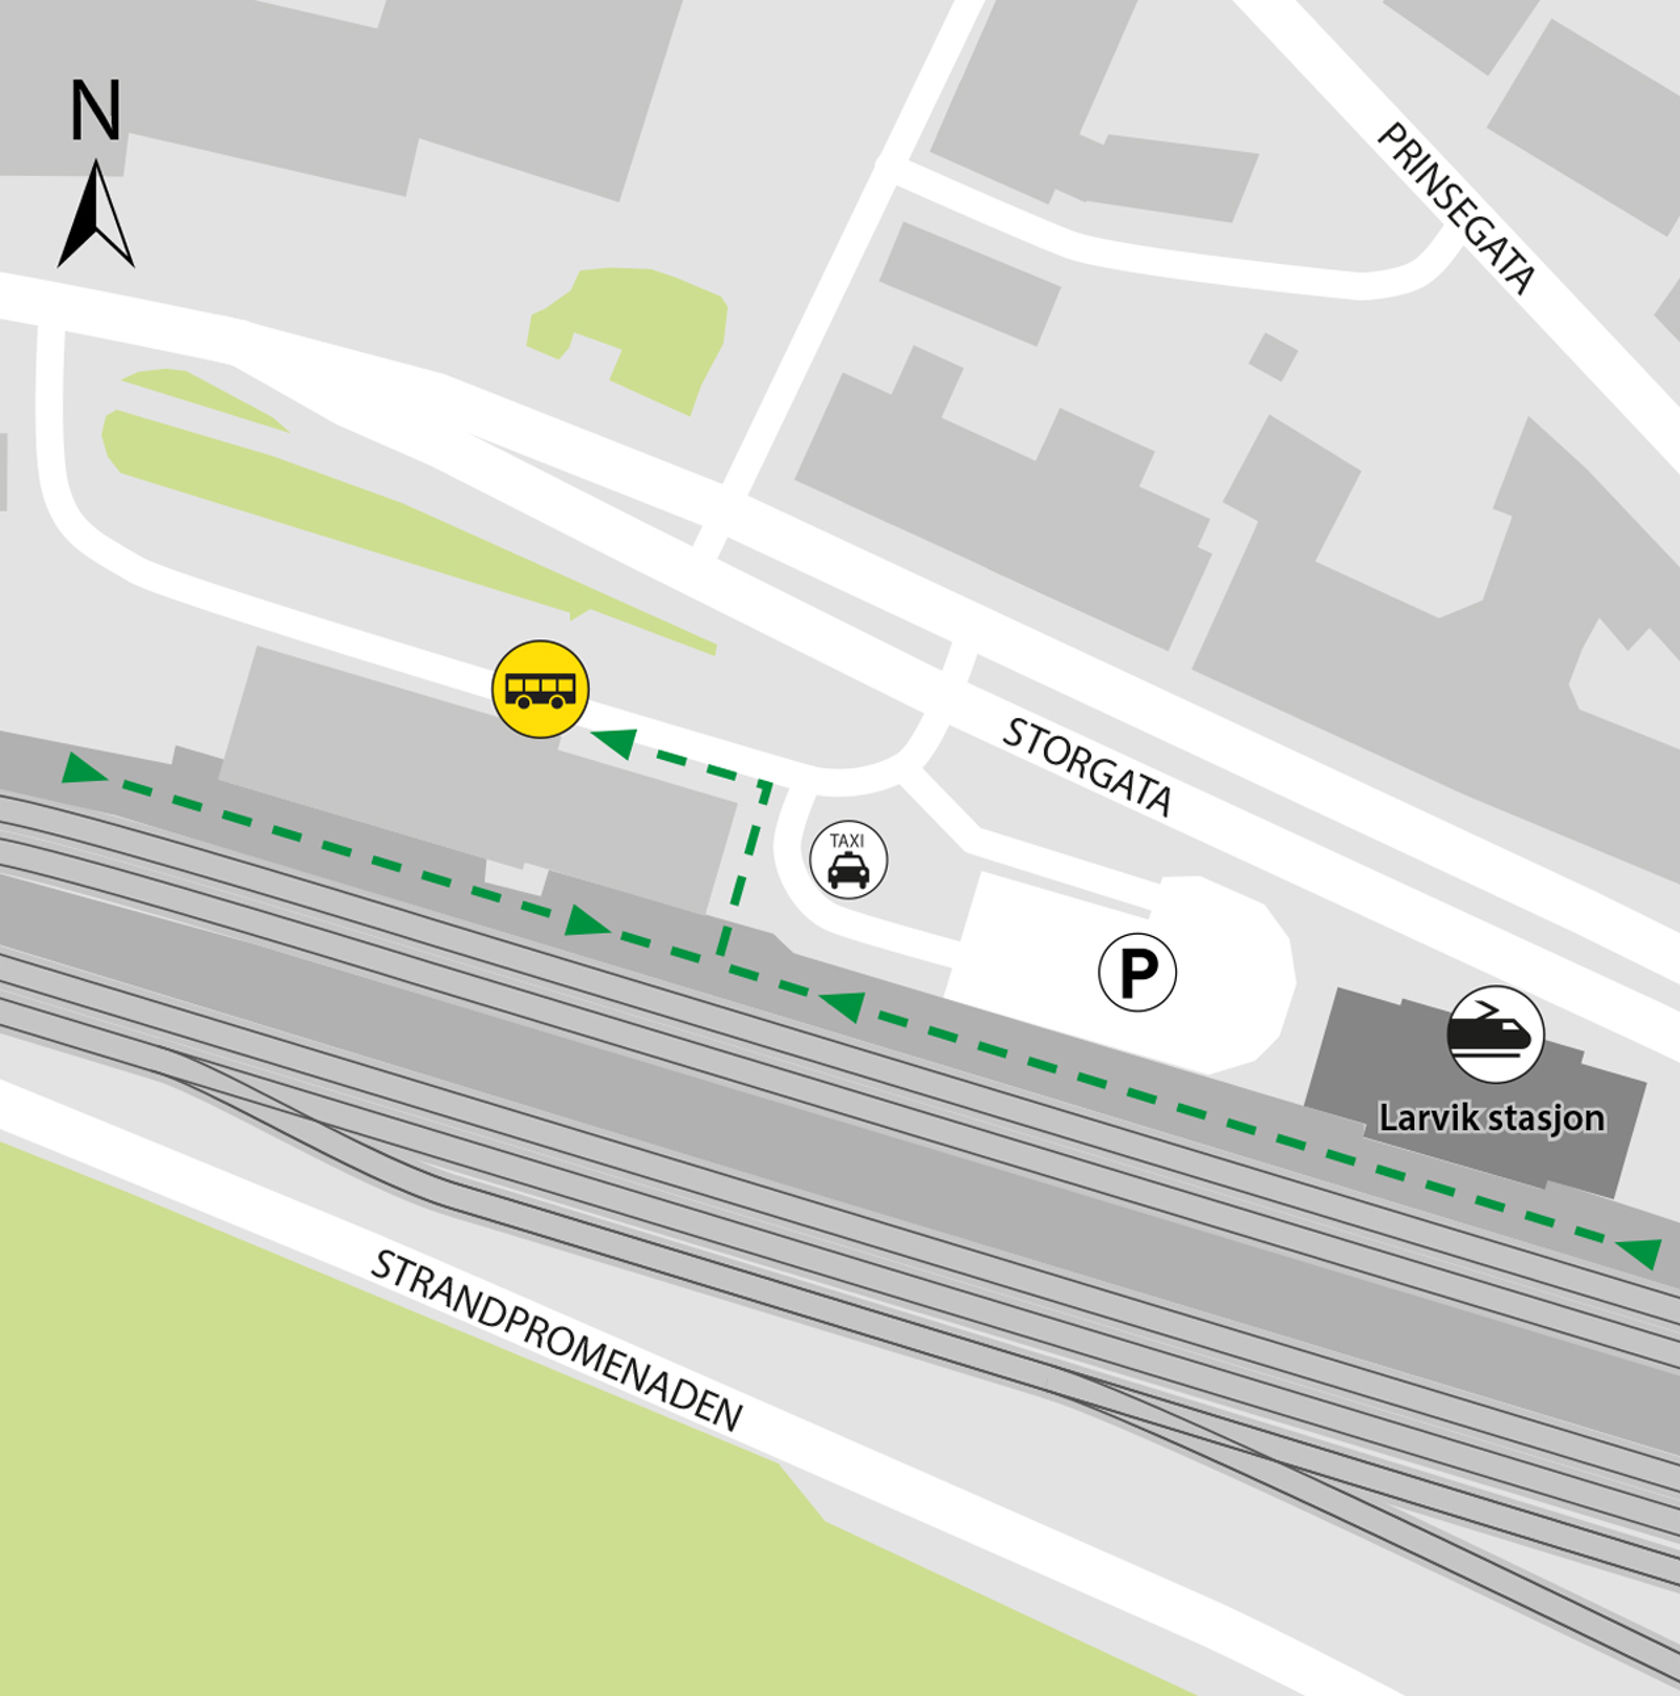 Map shows rail replacement service departs from bus stop Larvik station.